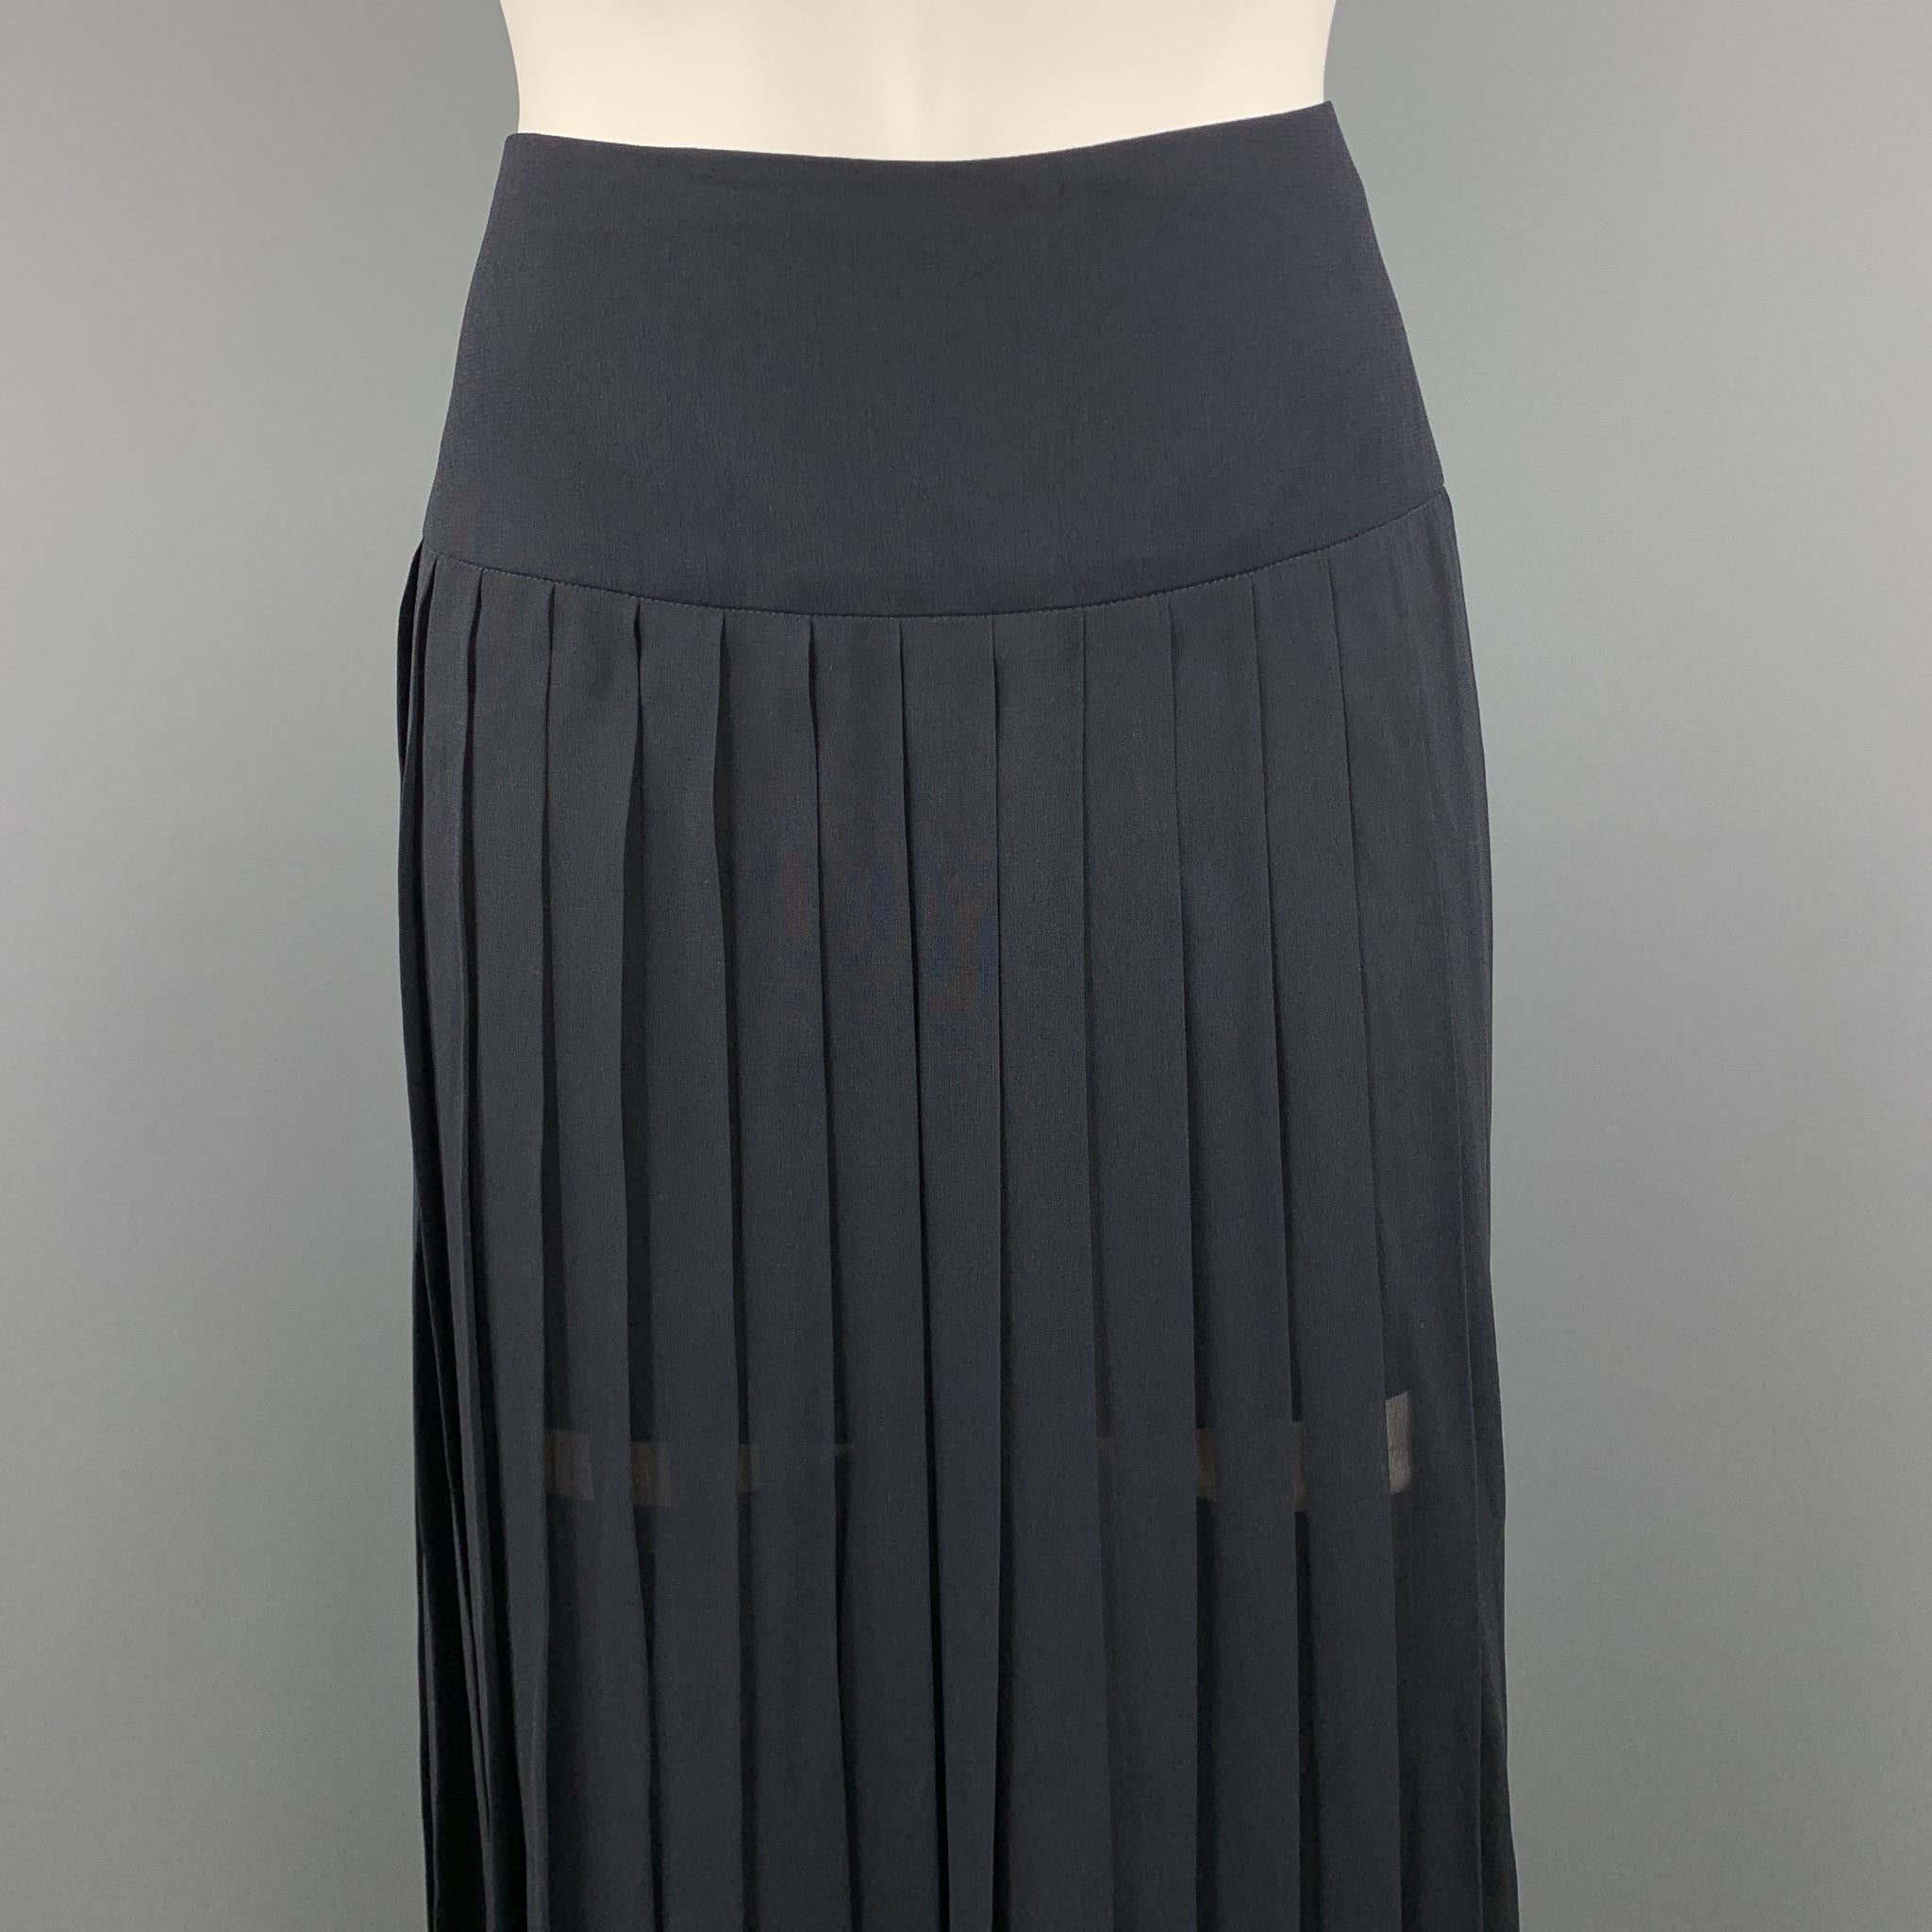 AKRIS long line skirt comes in navy silk chiffon with a thick waistband and box pleating throughout. Made in Switzerland.

Excellent Pre-Owned Condition.
Marked: US 6

Measurements:

Waist: 30 in.
Hip: 40 in.
Length: 39 in.